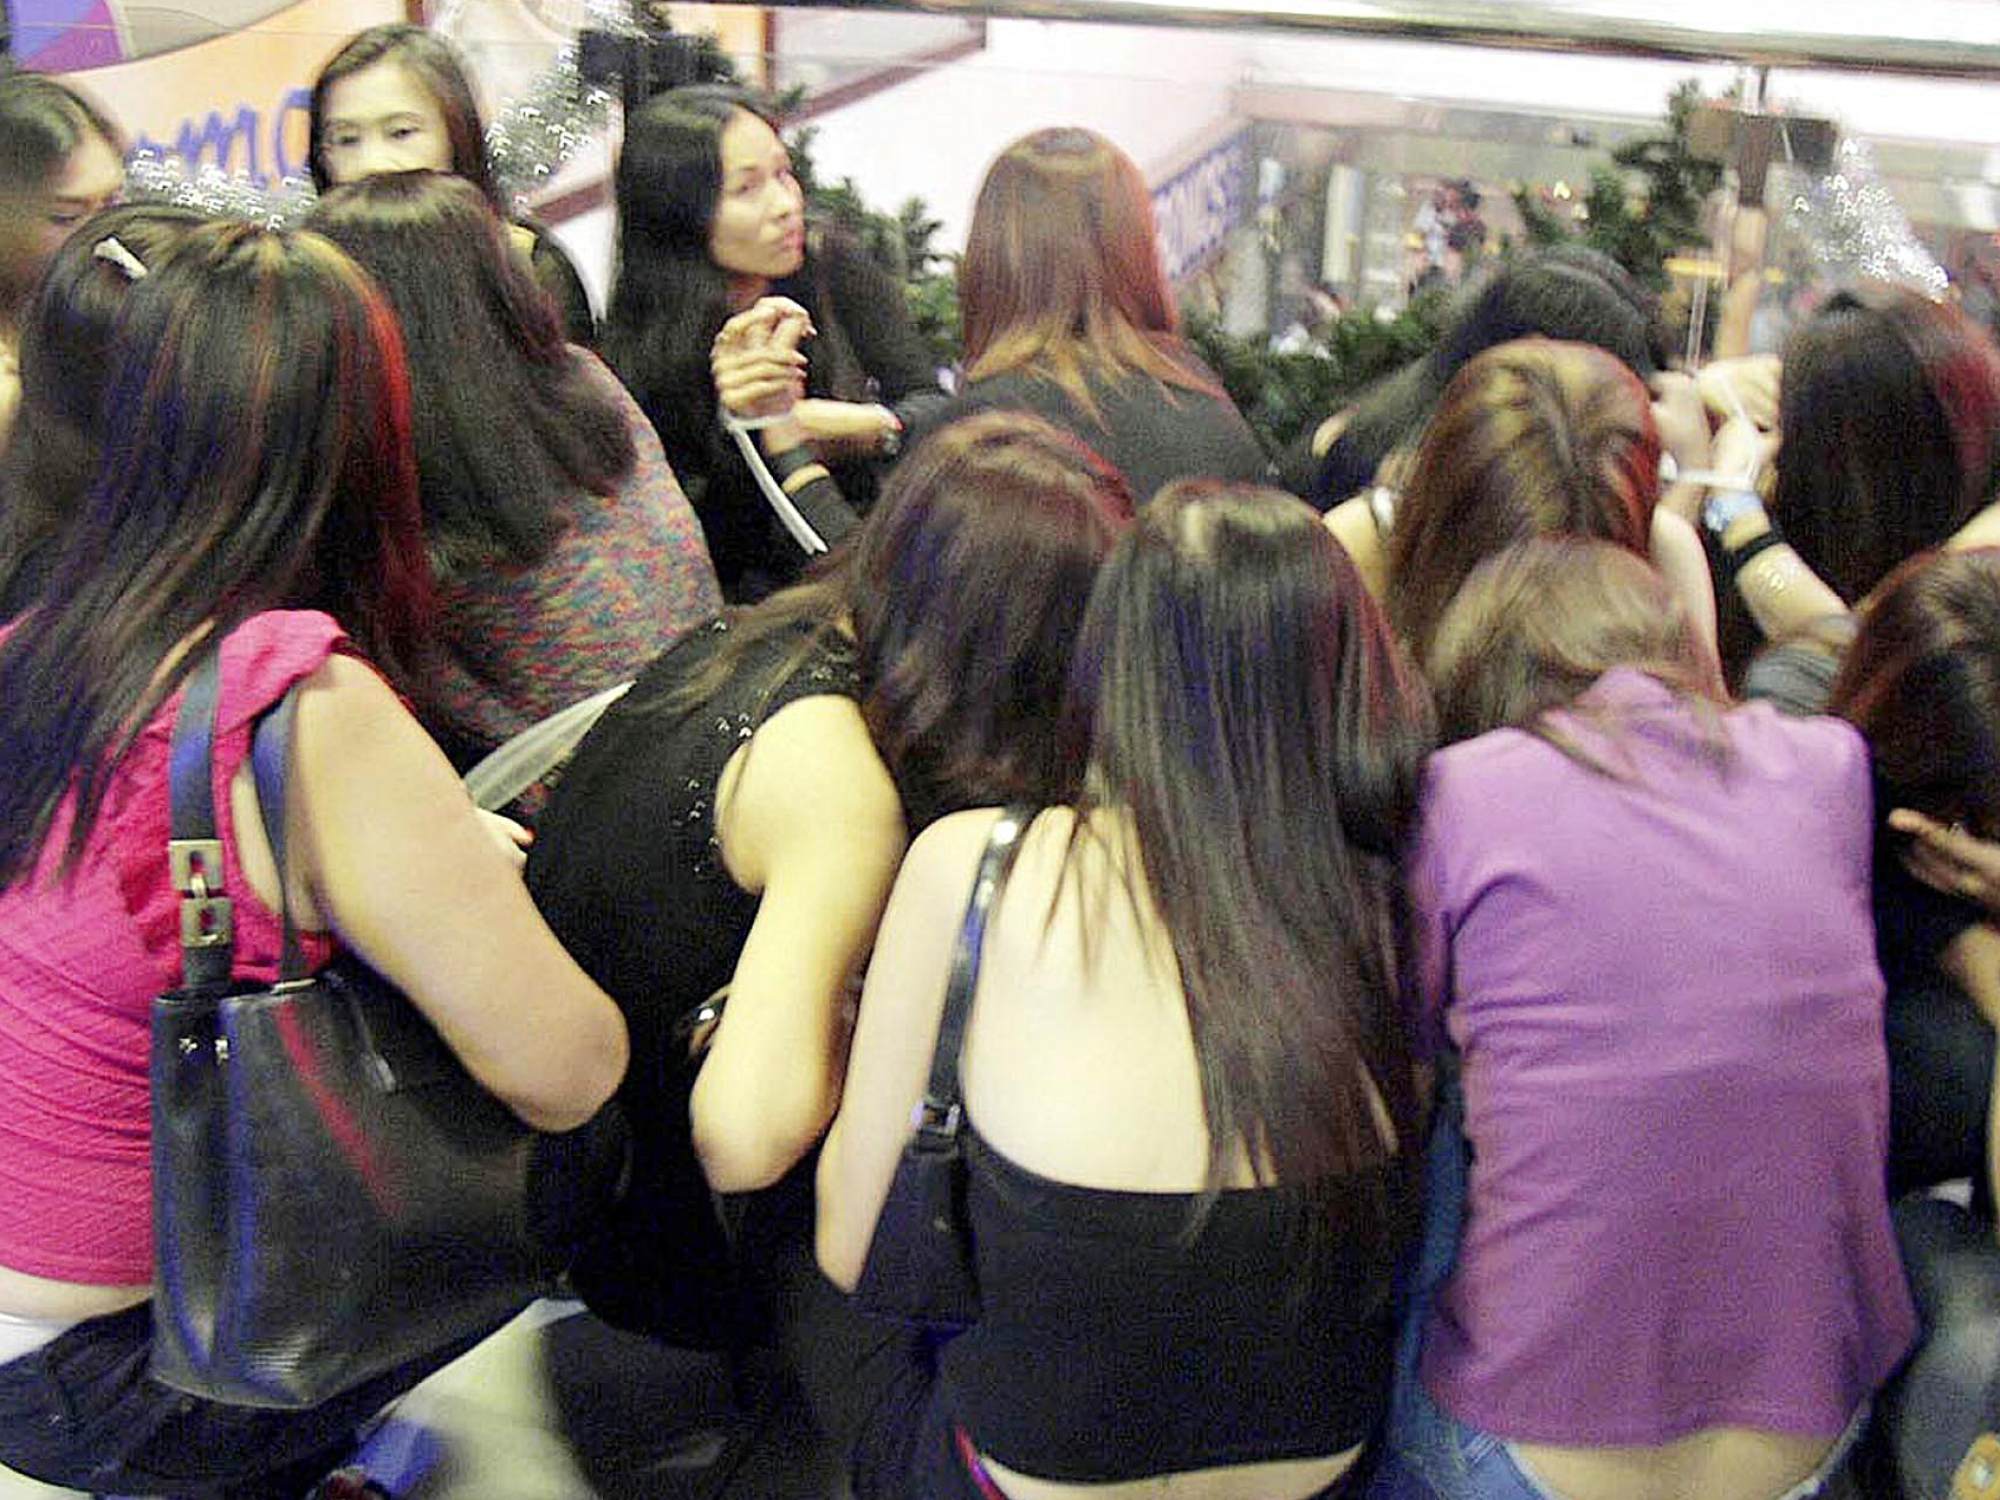 Foreign nationals are seen gathered outside a nightclub in Singapore’s Orchard Towers following a major police anti-vice operation in 2001. Photo: Singapore Police Force via AFP